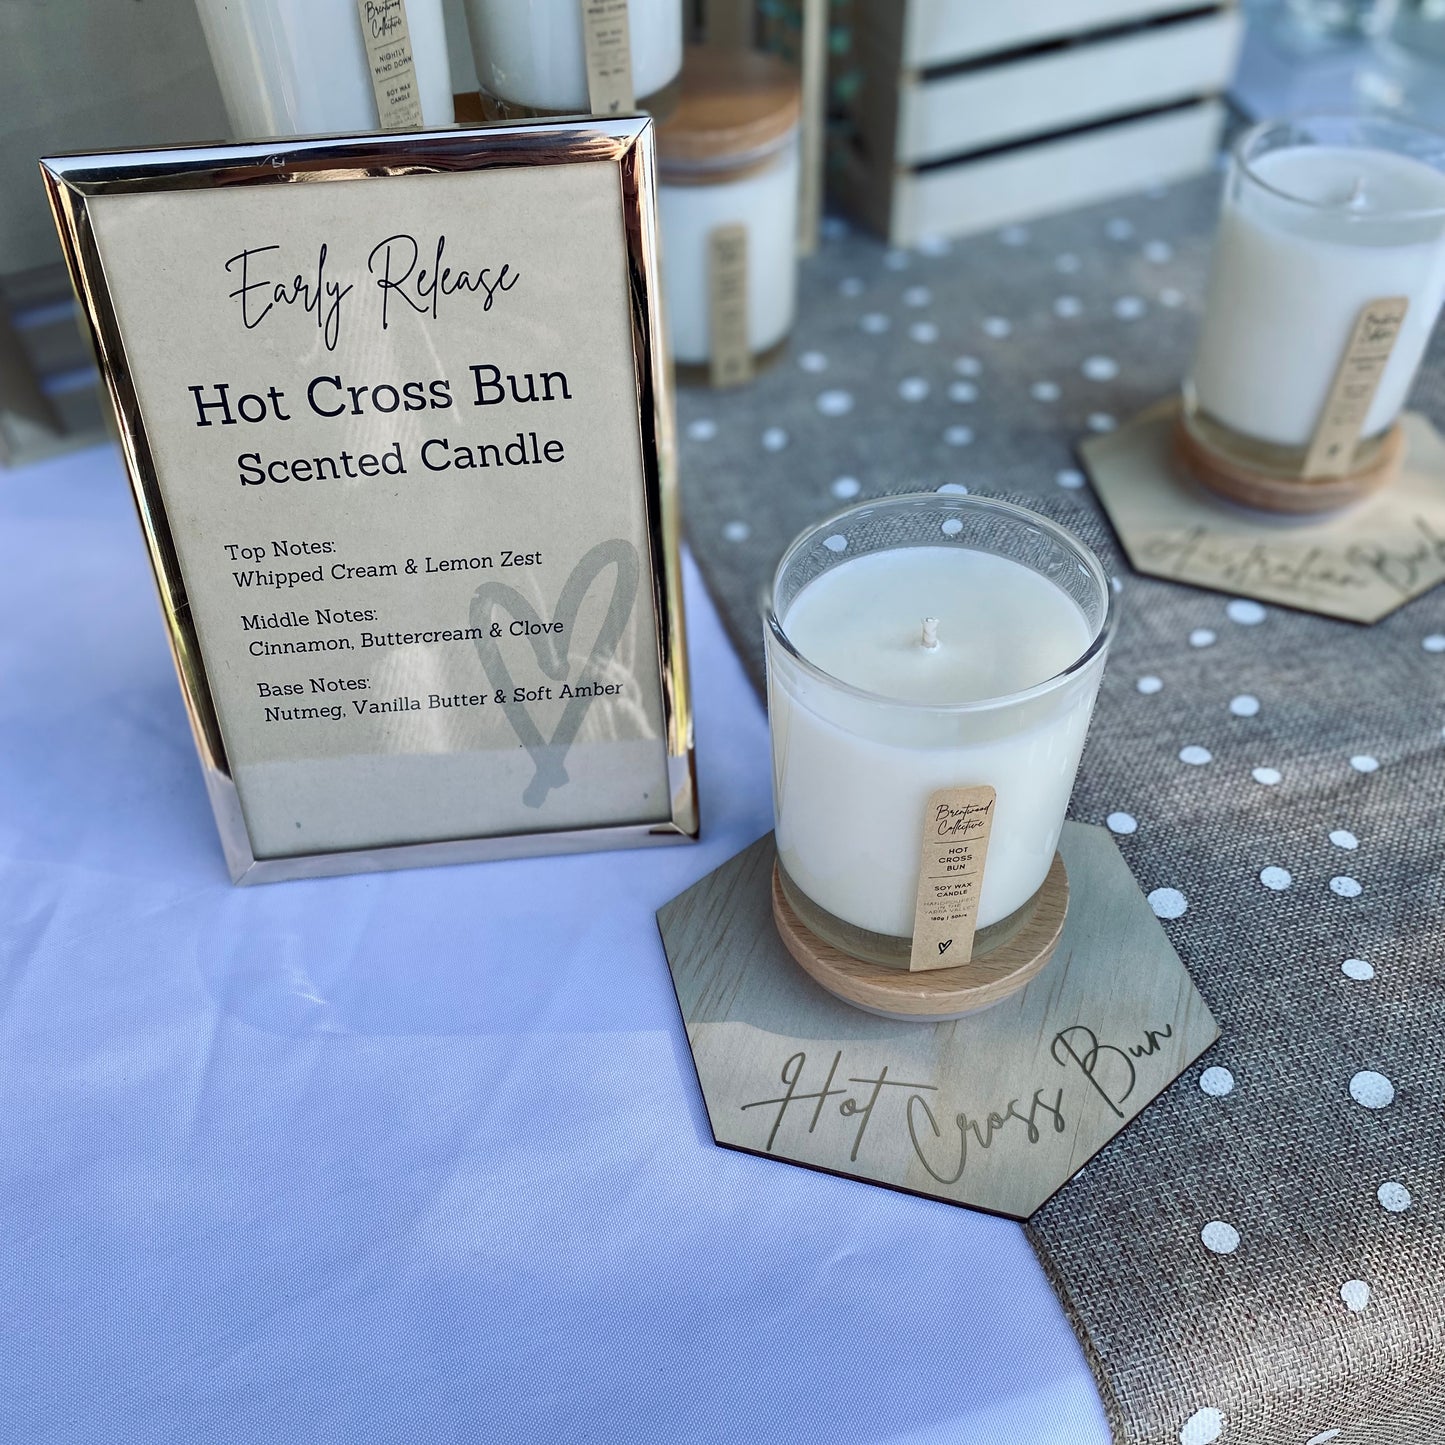 Hot Cross Bun Scented Candle - clear glass jar with natural timber lid & slim/minimal Kraft brown label and black text. Shown on market stall table with hexagon placemat with gold script font reading “Hot Cross Bun”. 